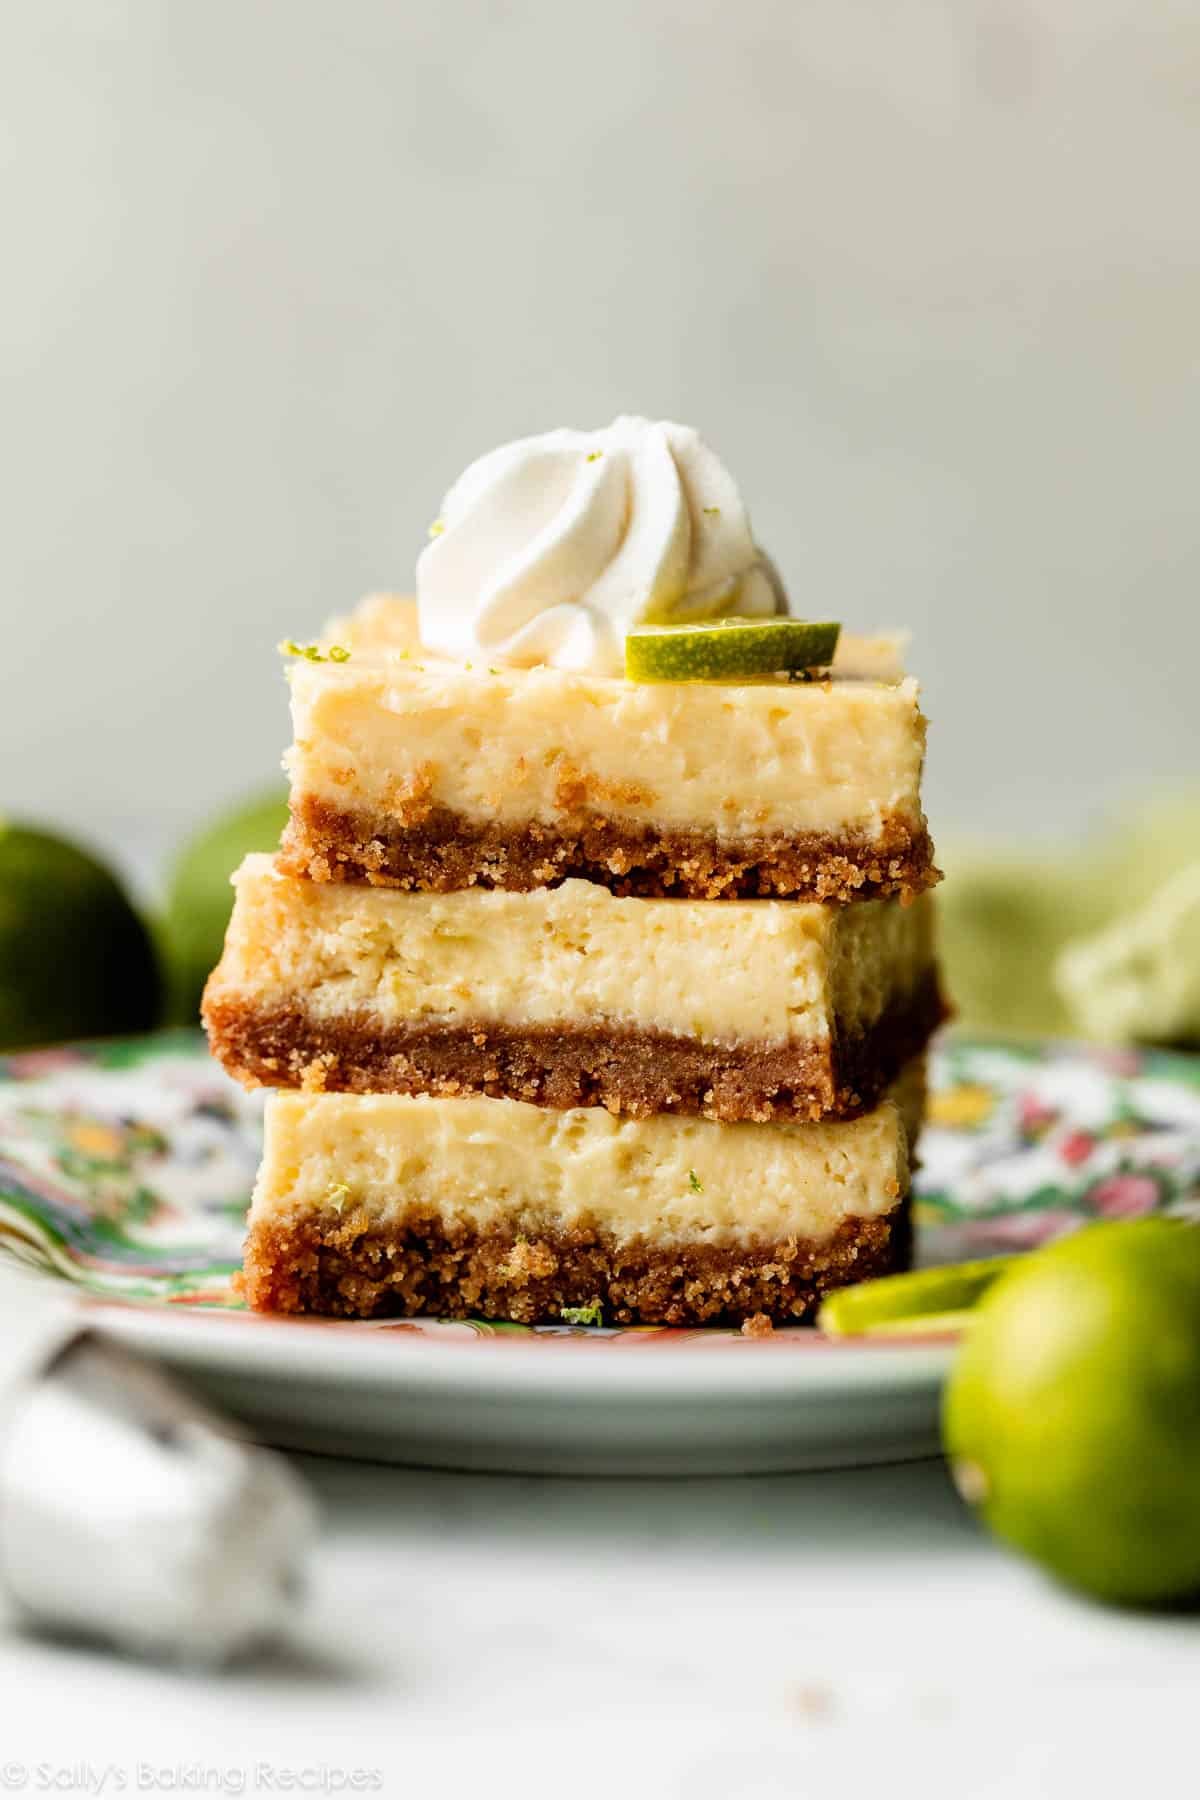 stack of 3 key lime pie bars on floral green plate.